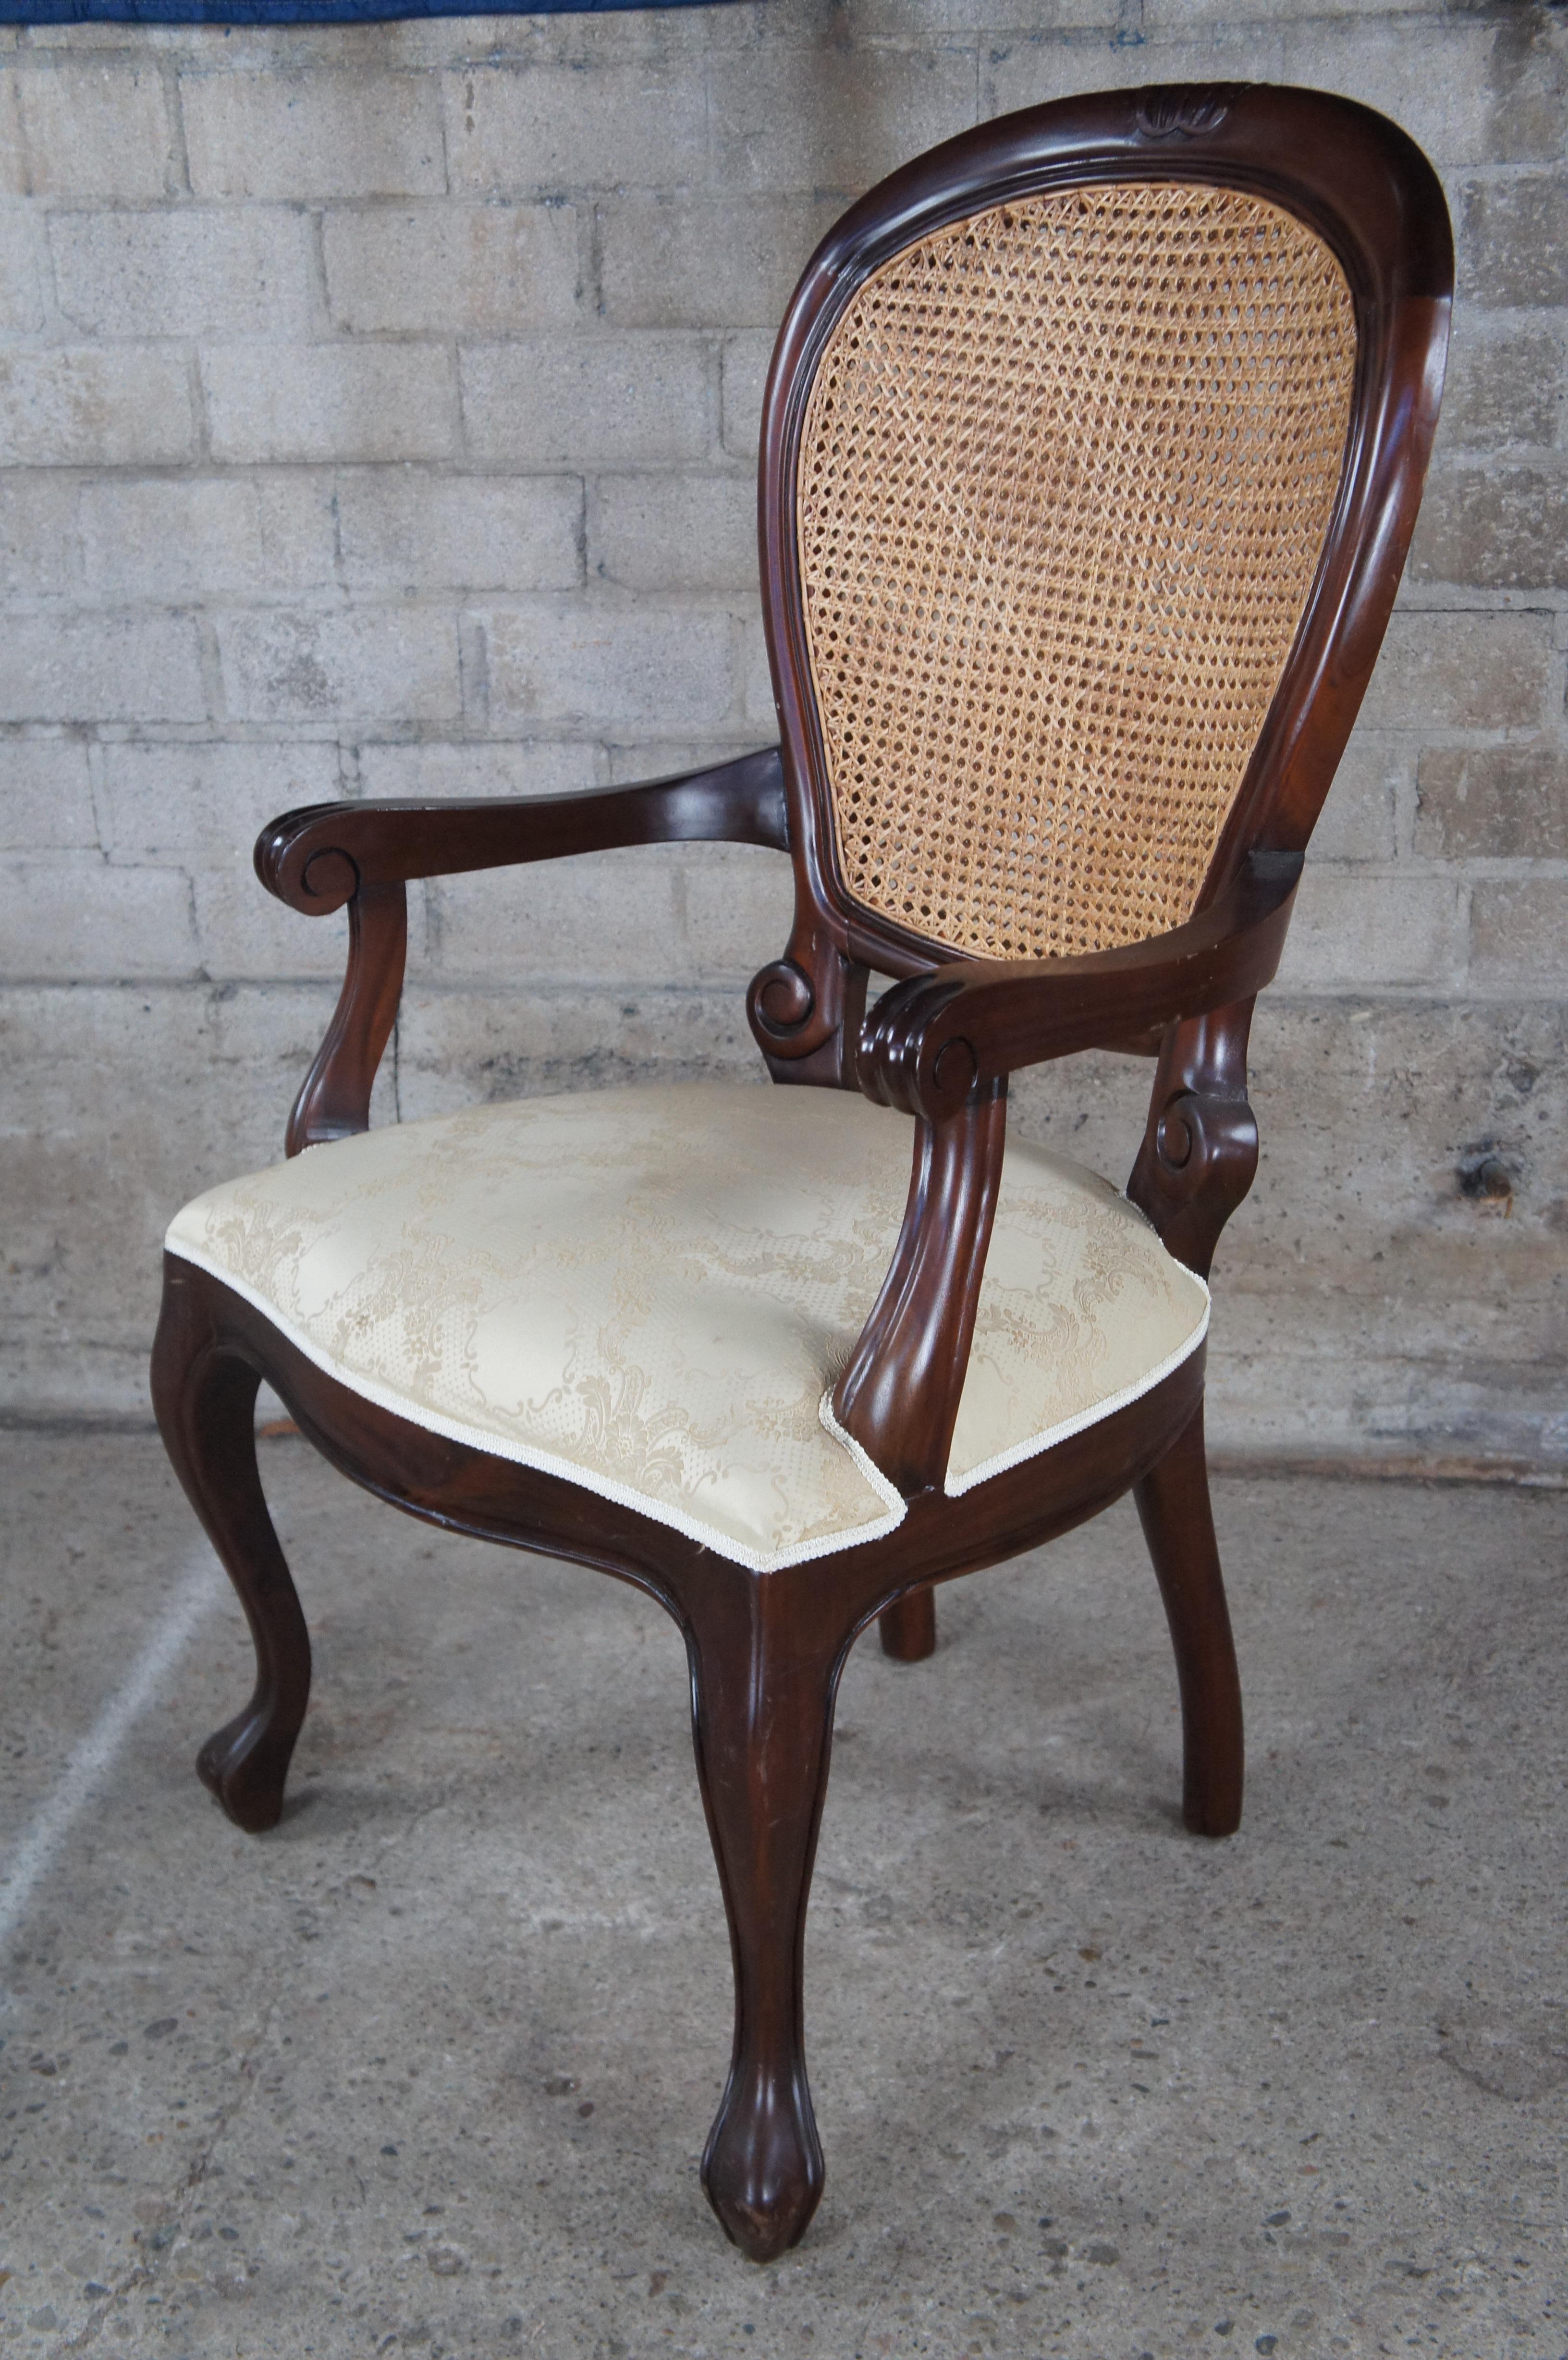 3 Victorian Revival Mahogany Balloon Back Caned Dining Chairs Silk Brocade Seats For Sale 4